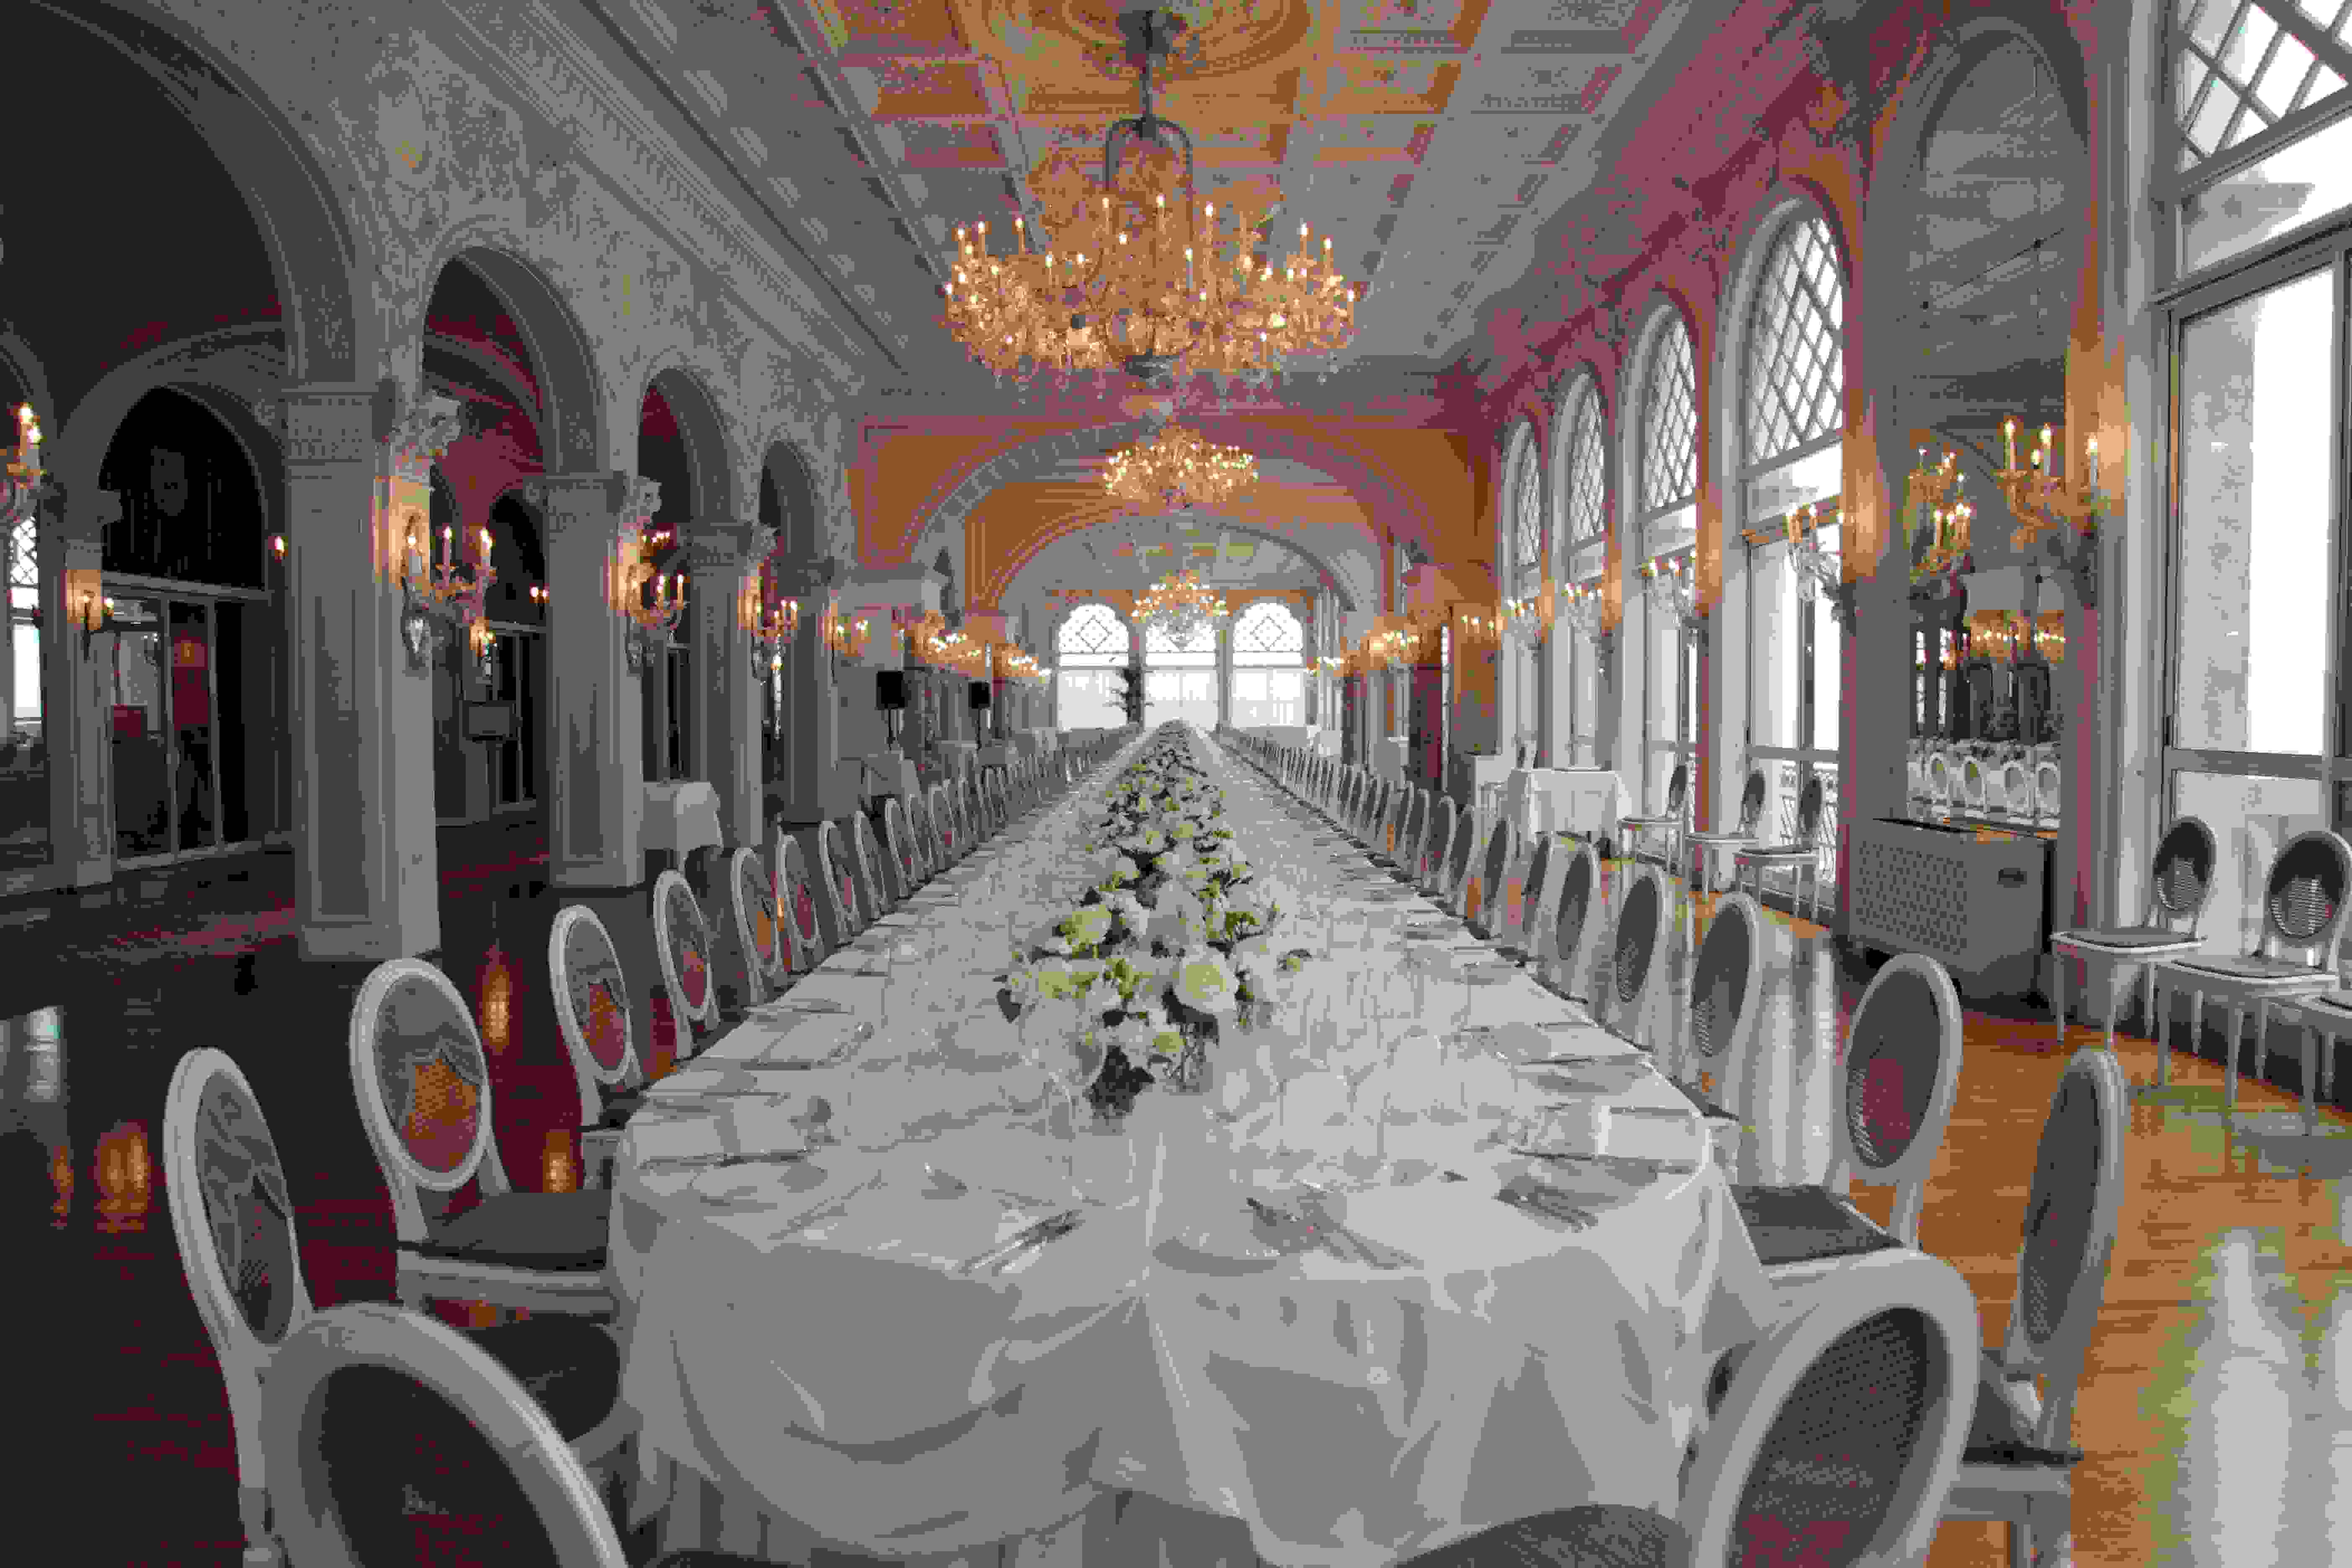 Details of Sala Stucchi during a wedding reception | Hotel Excelsior Venice Lido Resort, event venue in Venice, Italy